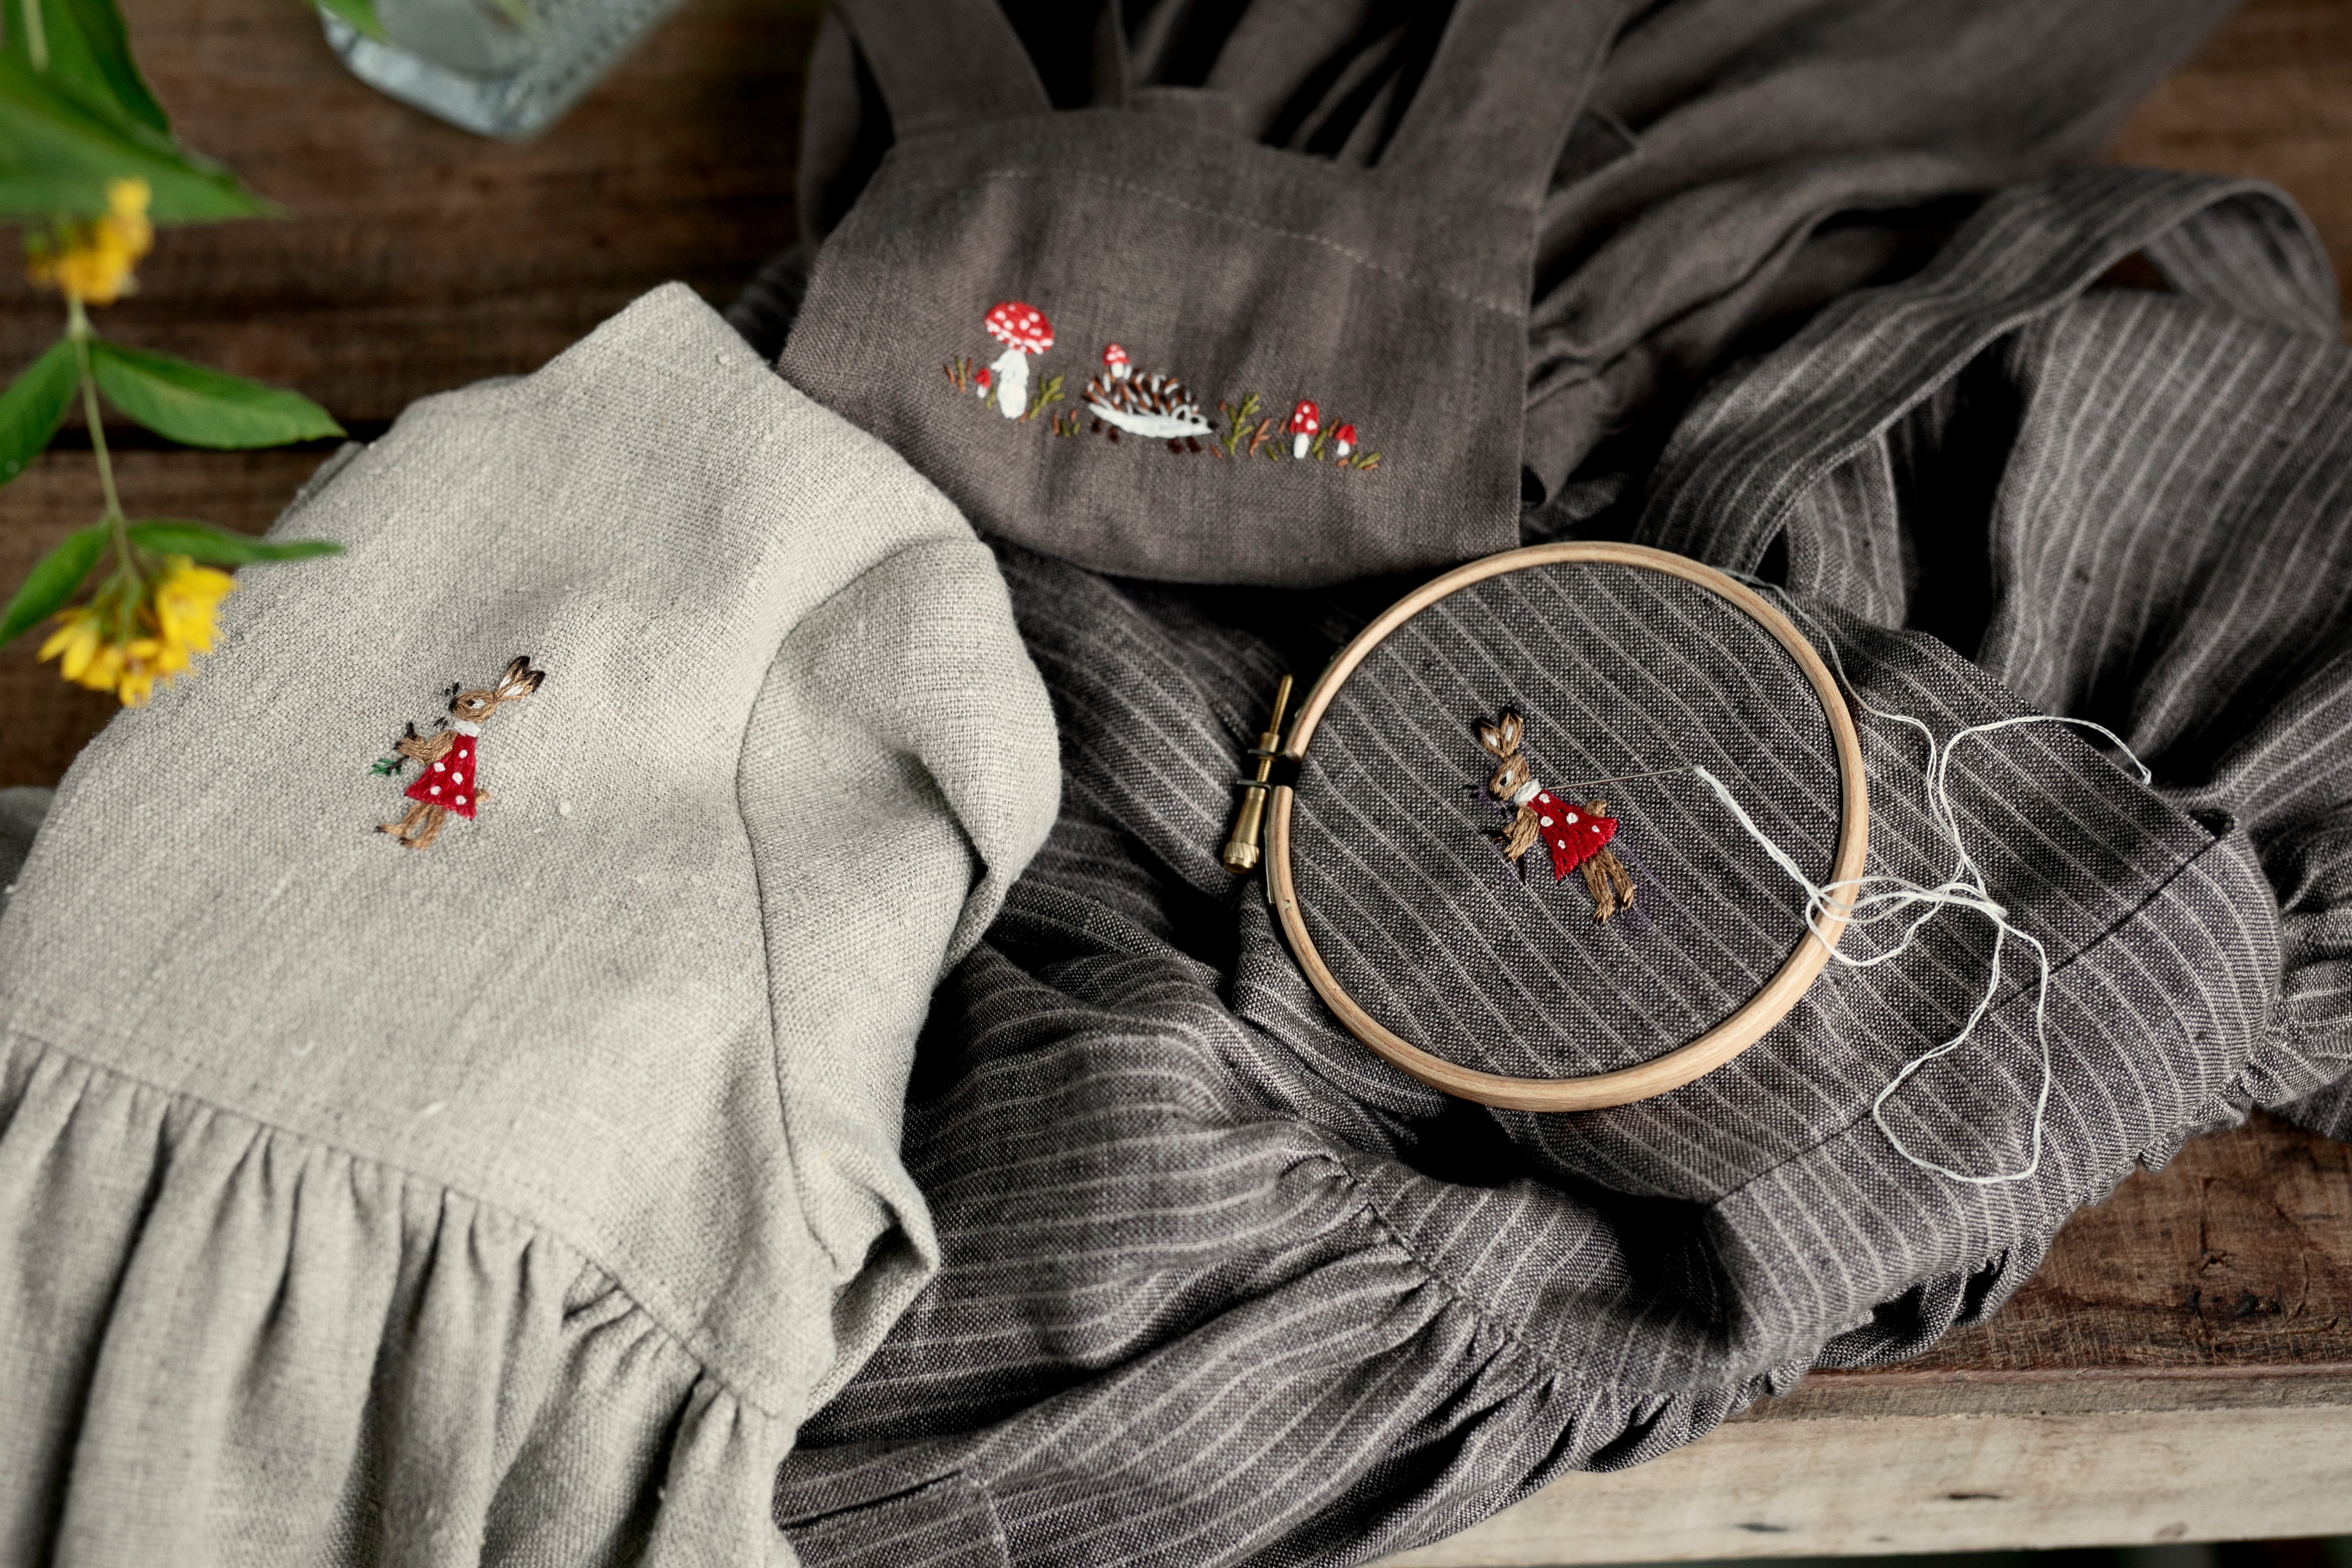 AW’22: New Embroideries & Patterns